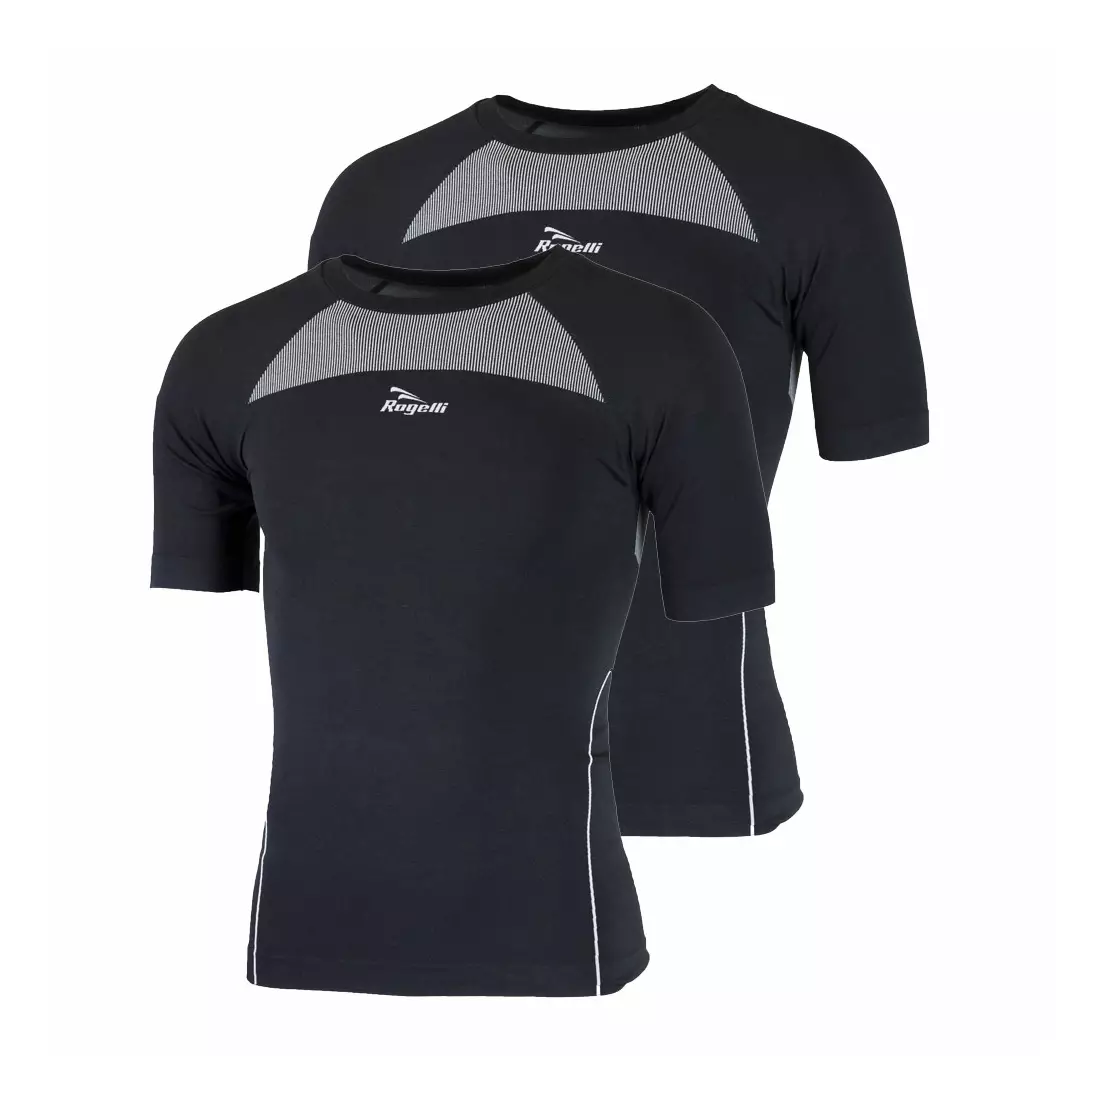 ROGELLI CORE 2-pack underwear short sleeve black thermo active shirt 070.021